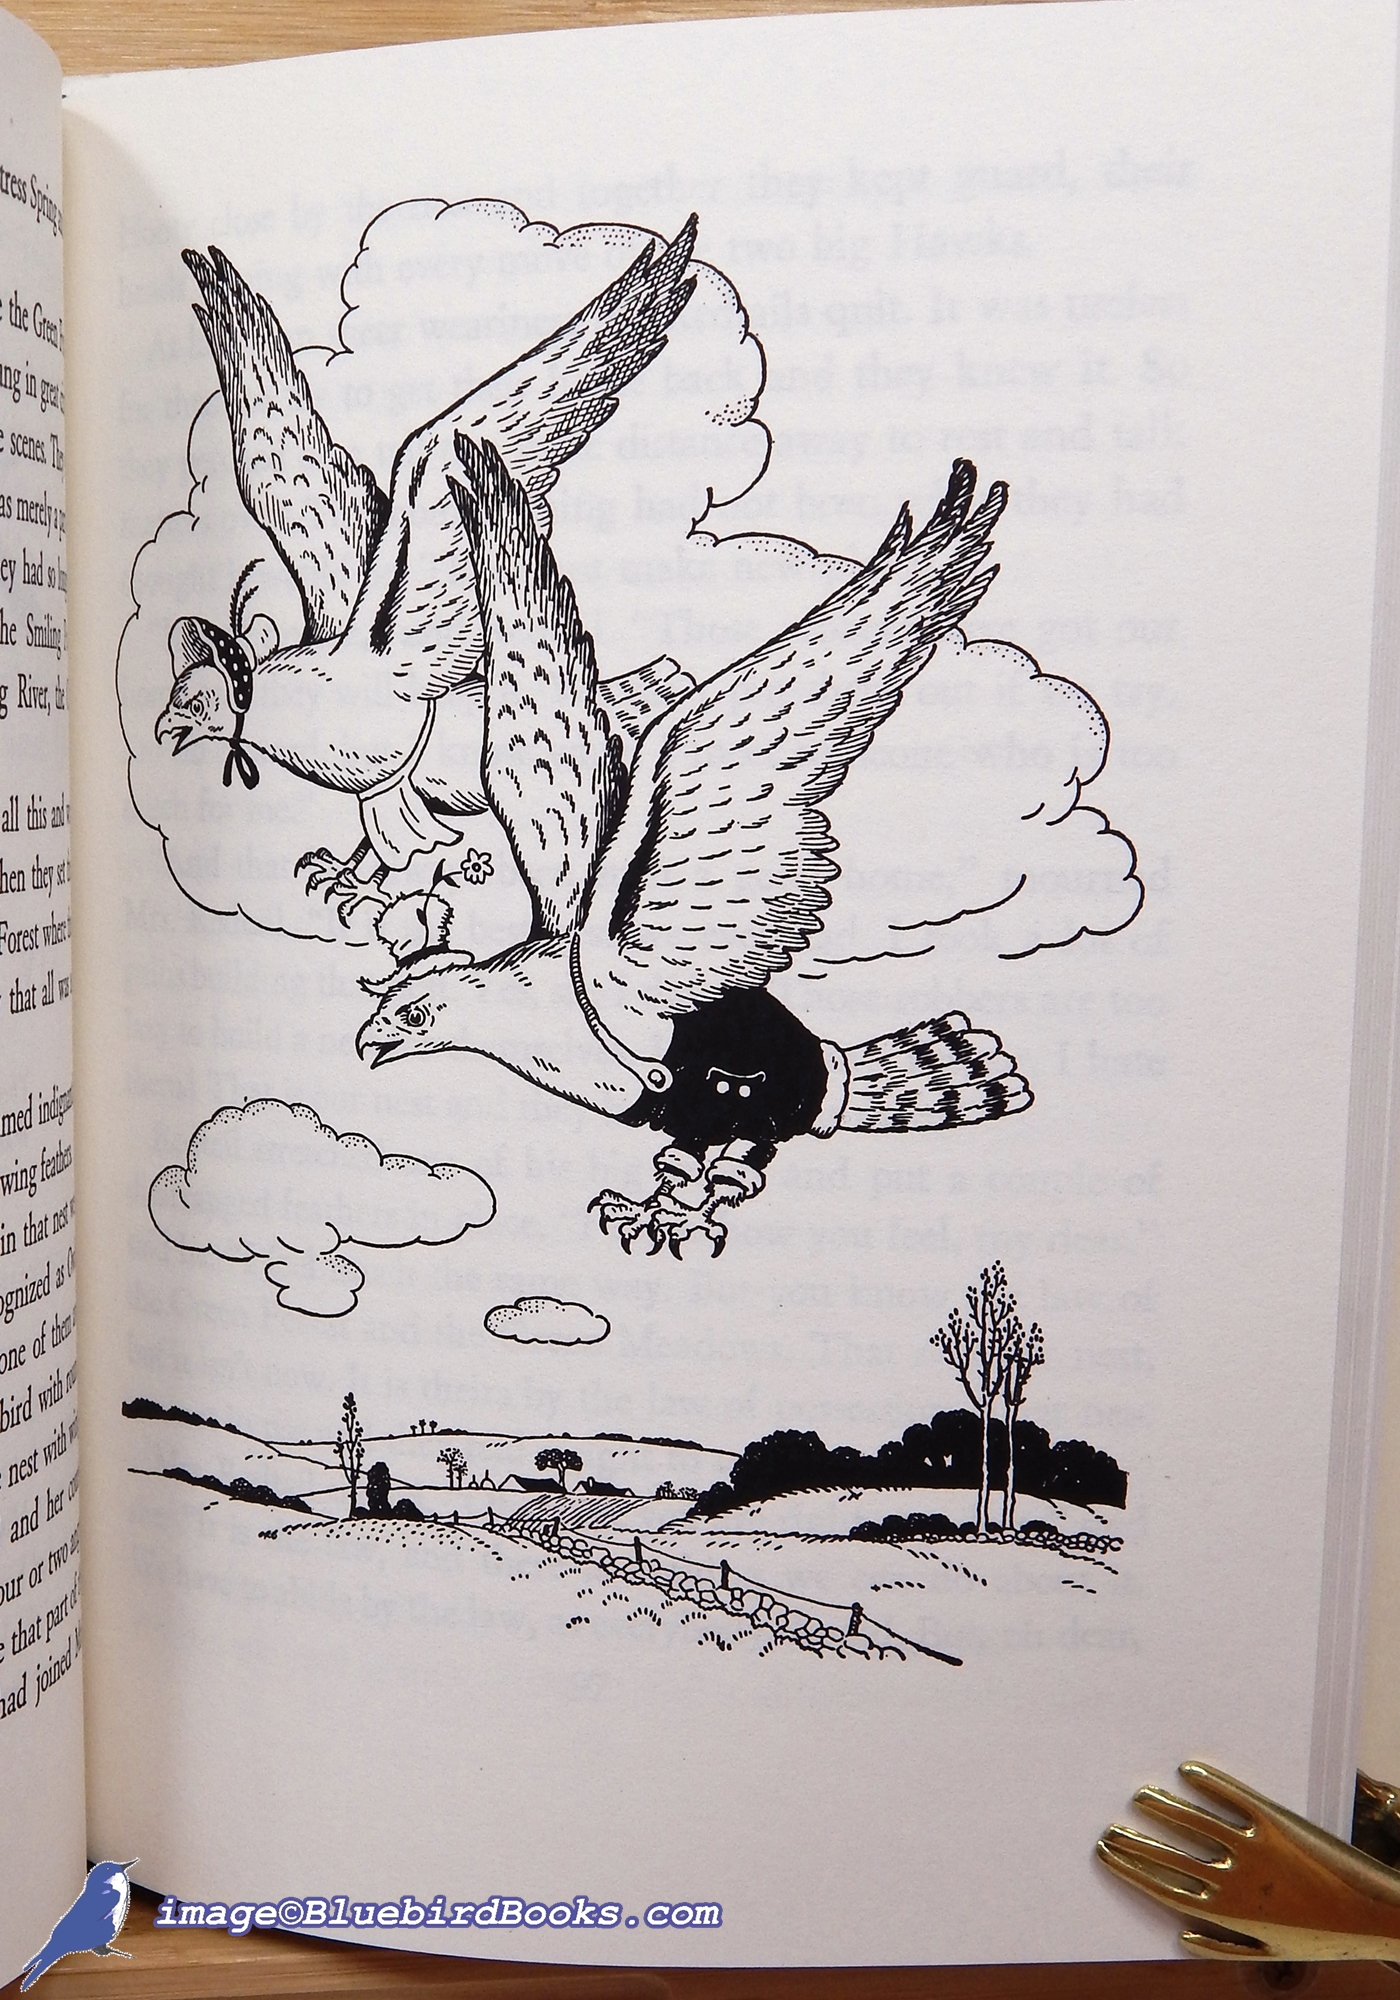 BURGESS, THORNTON W. - The Crooked Little Path: A Book of Nature Stories